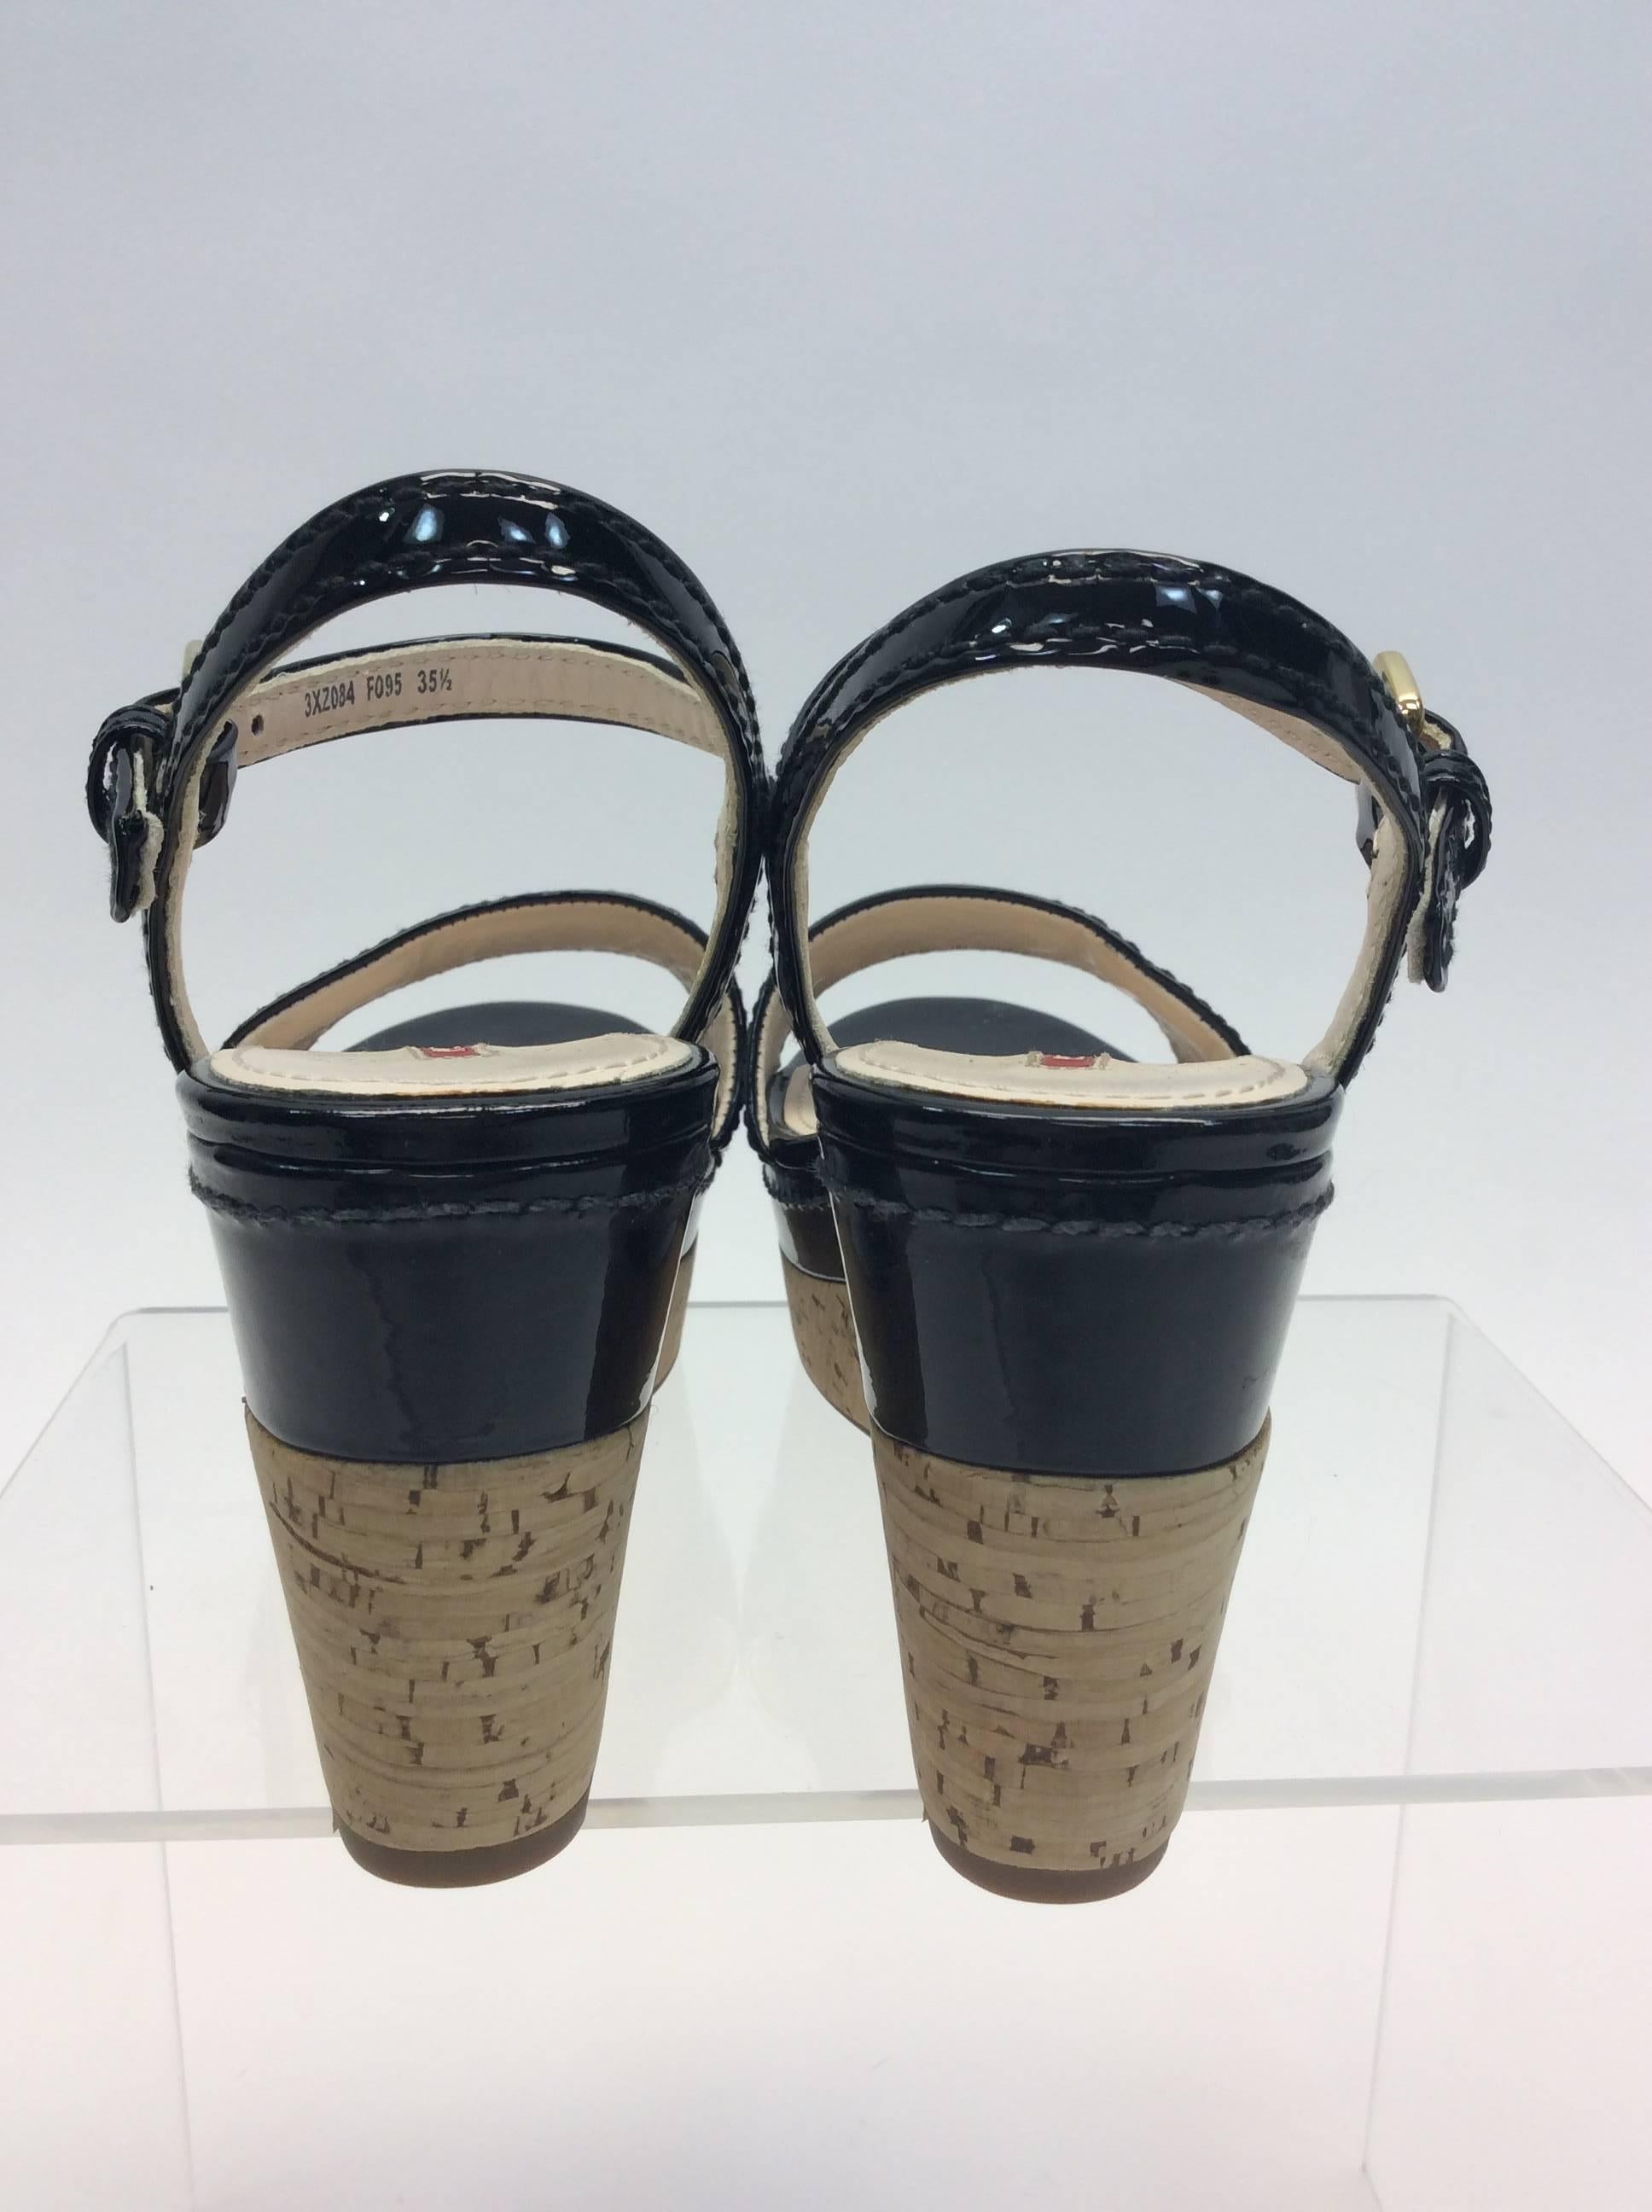 Prada Black Wedge Sandal In Excellent Condition For Sale In Narberth, PA